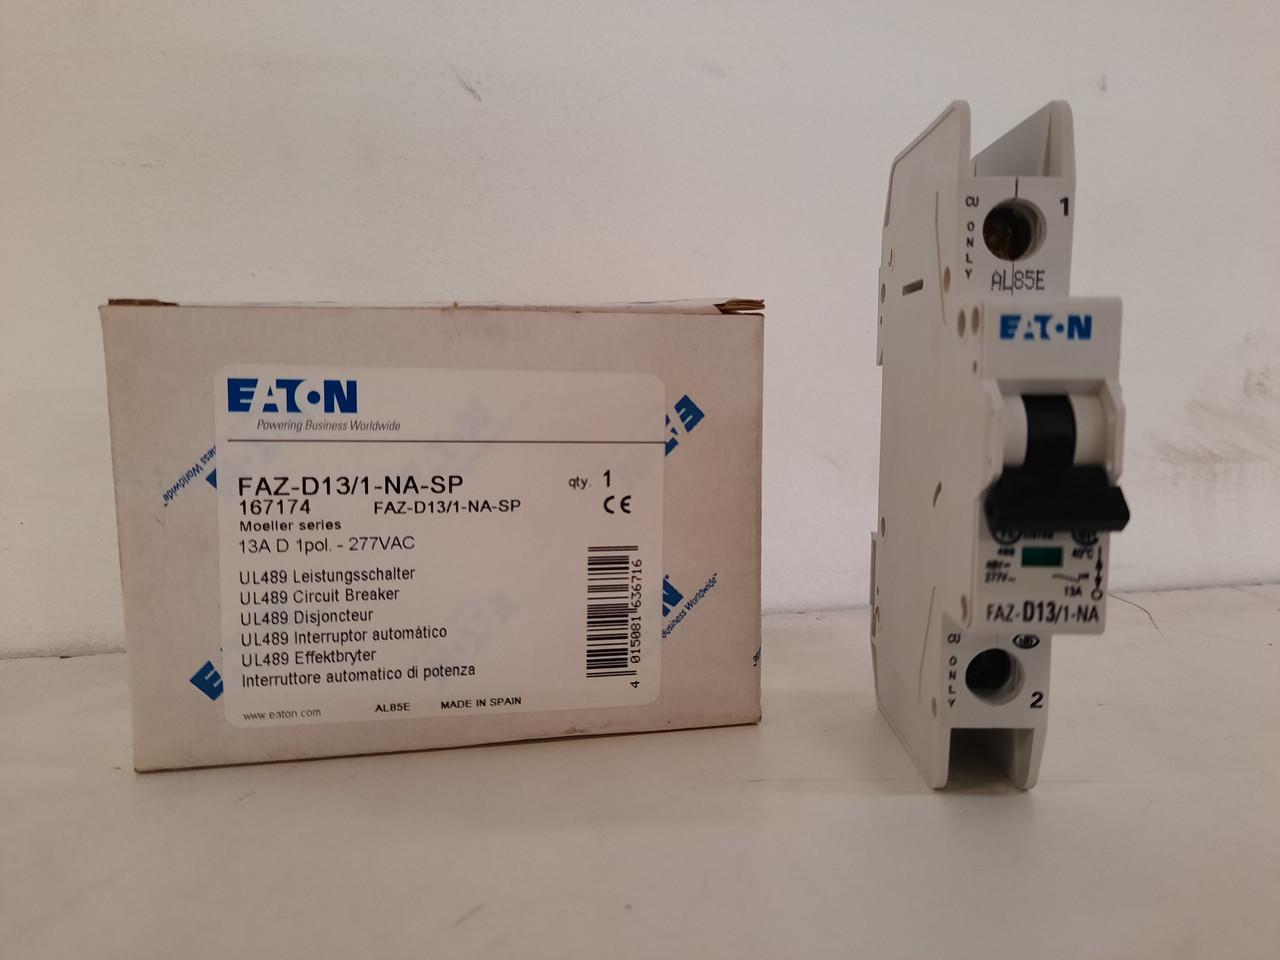 Eaton FAZ-D13/1-NA-SP Eaton FAZ branch protector,UL 489 Industrial miniature circuit breaker - supplementary protector,Single package,High levels of inrush current are expected,13 A,10 kAIC,Single-pole,277 V,10-20X /n,Q38,50-60 Hz,Screw terminals,D Curve